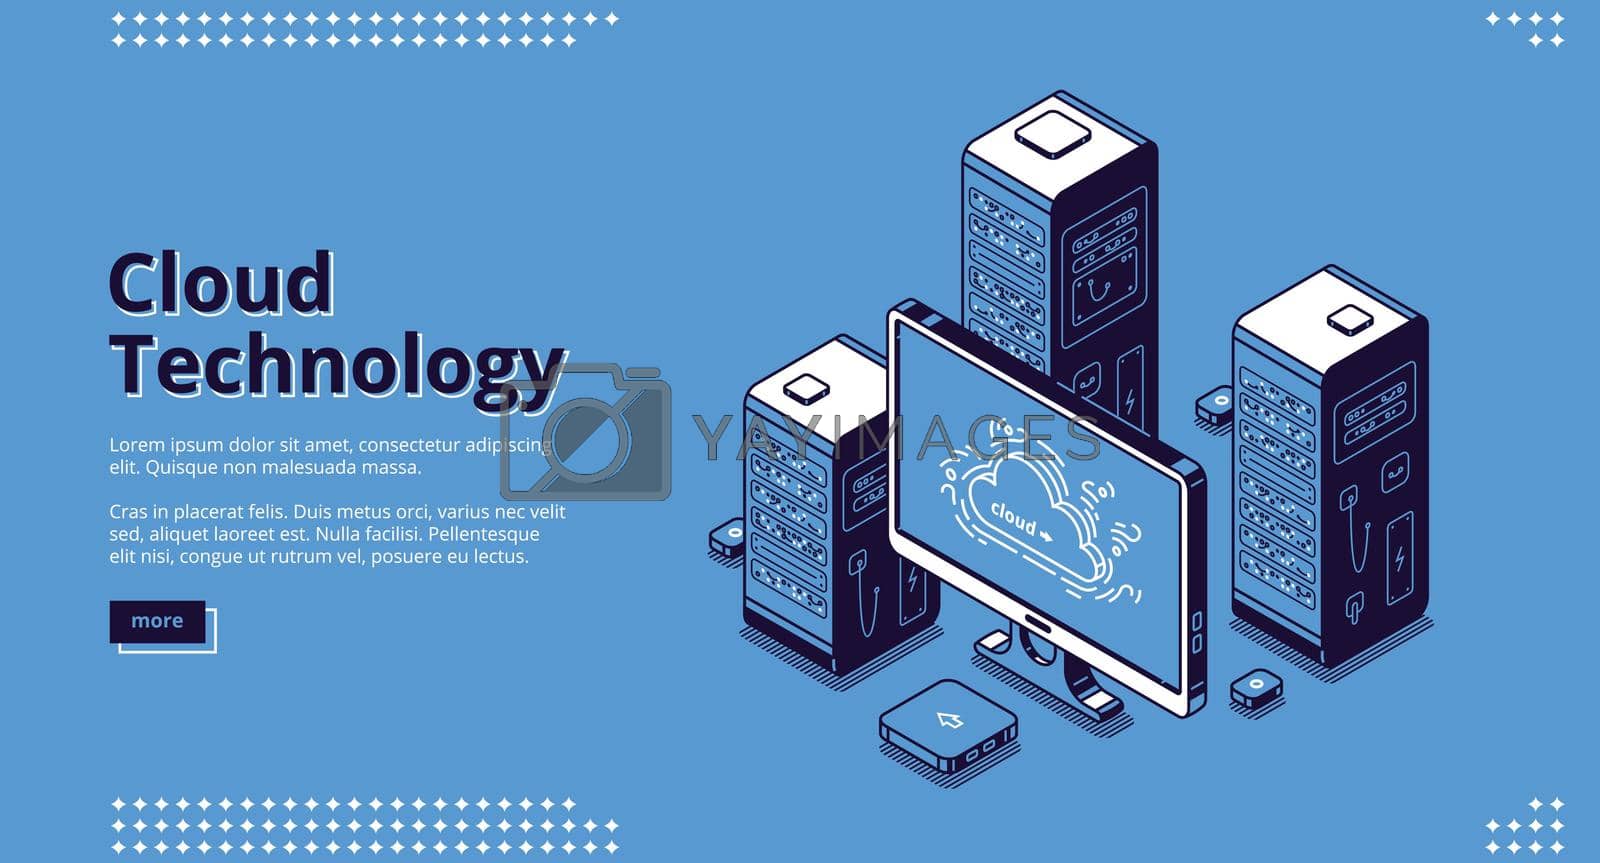 Cloud technology banner. Concept of digital information storage and network system. Vector landing page of internet service for access to server database with isometric icons of computer and hardware